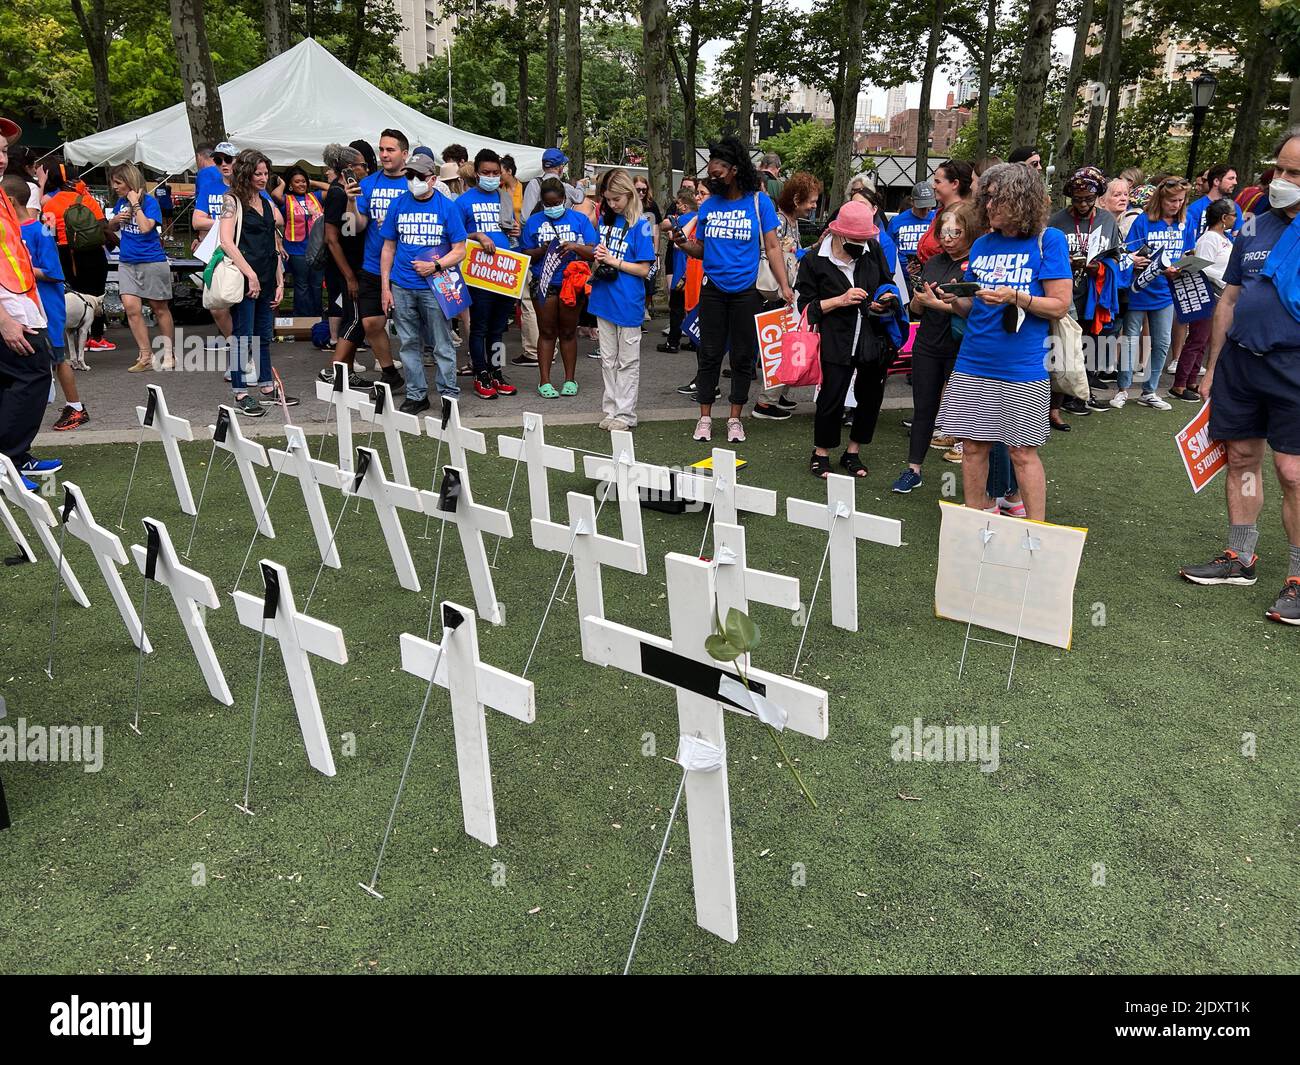 'March For Our Lives' demonstration and march across the Brooklyn Bridge from Cadman Plaza, Brooklyn to City Hall speaking out for substantive gun laws to protect children and all citizens after recent mass shootings and slaughter around the United States. Crosses identifying children killed at the Evalde school in Texas. Stock Photo